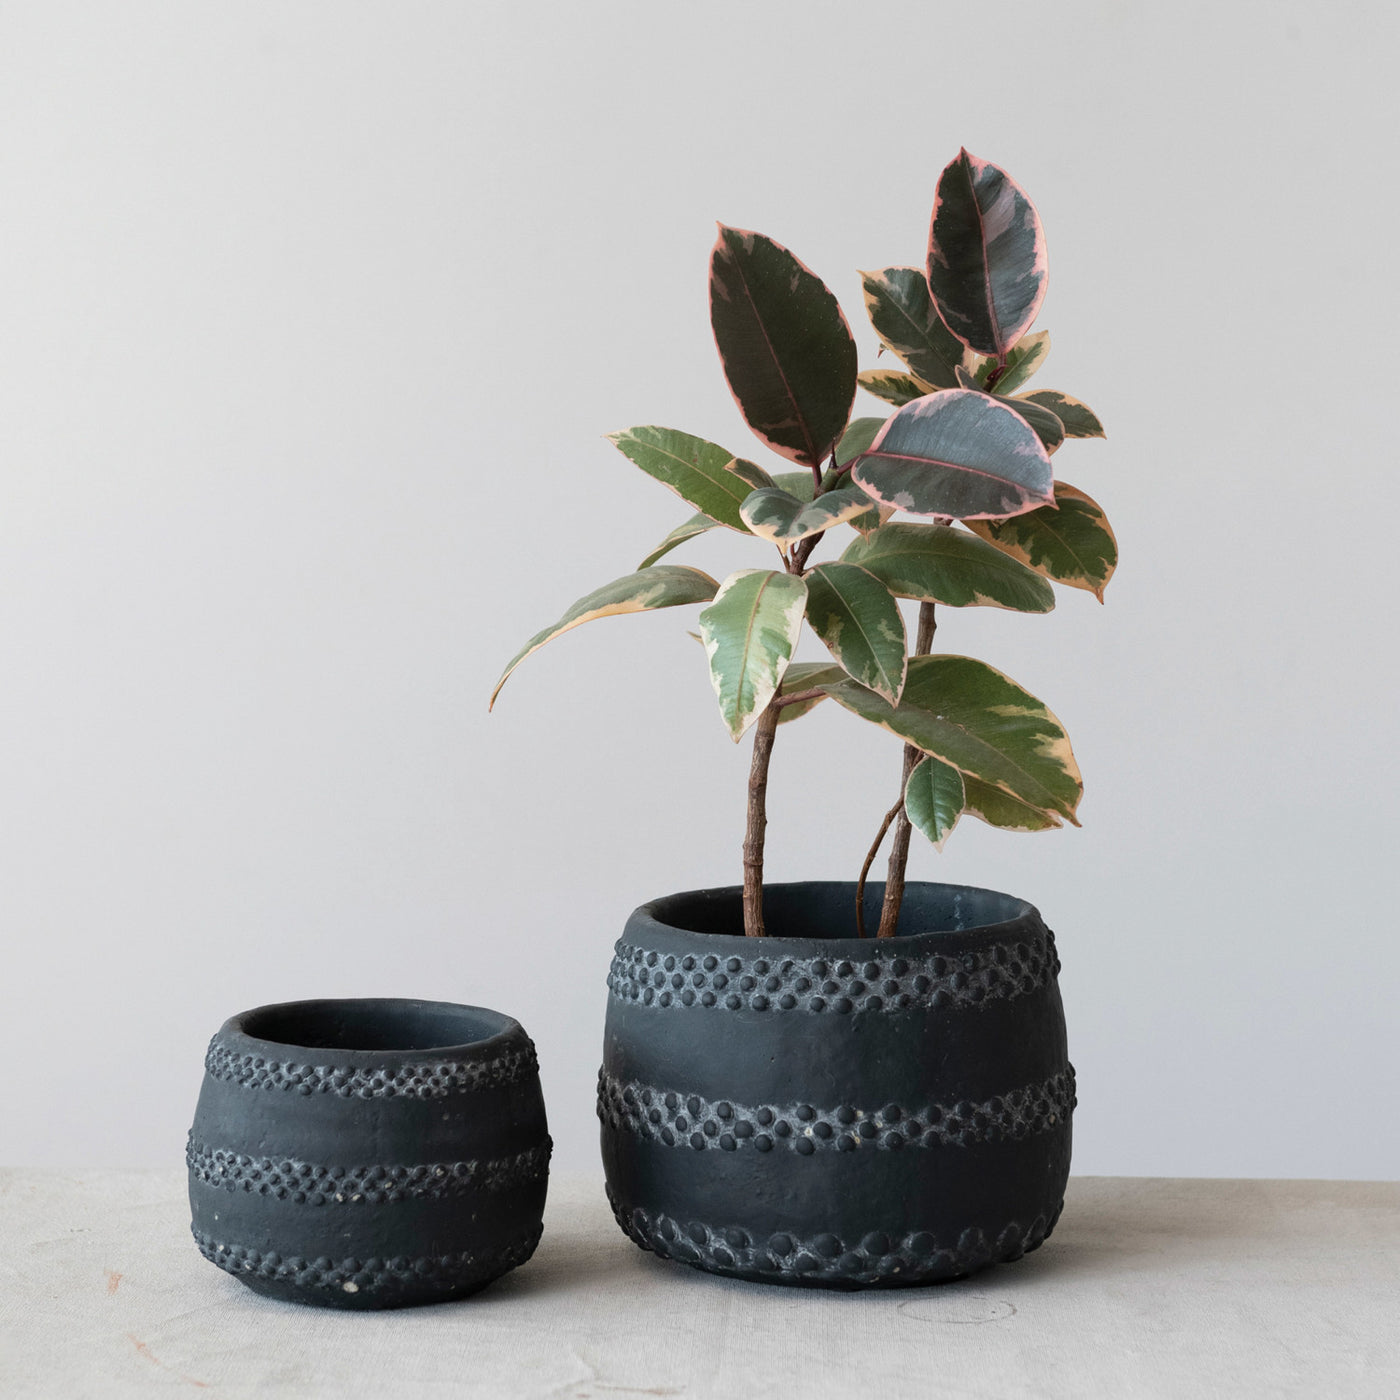 Terra-cotta Planter with raised dots